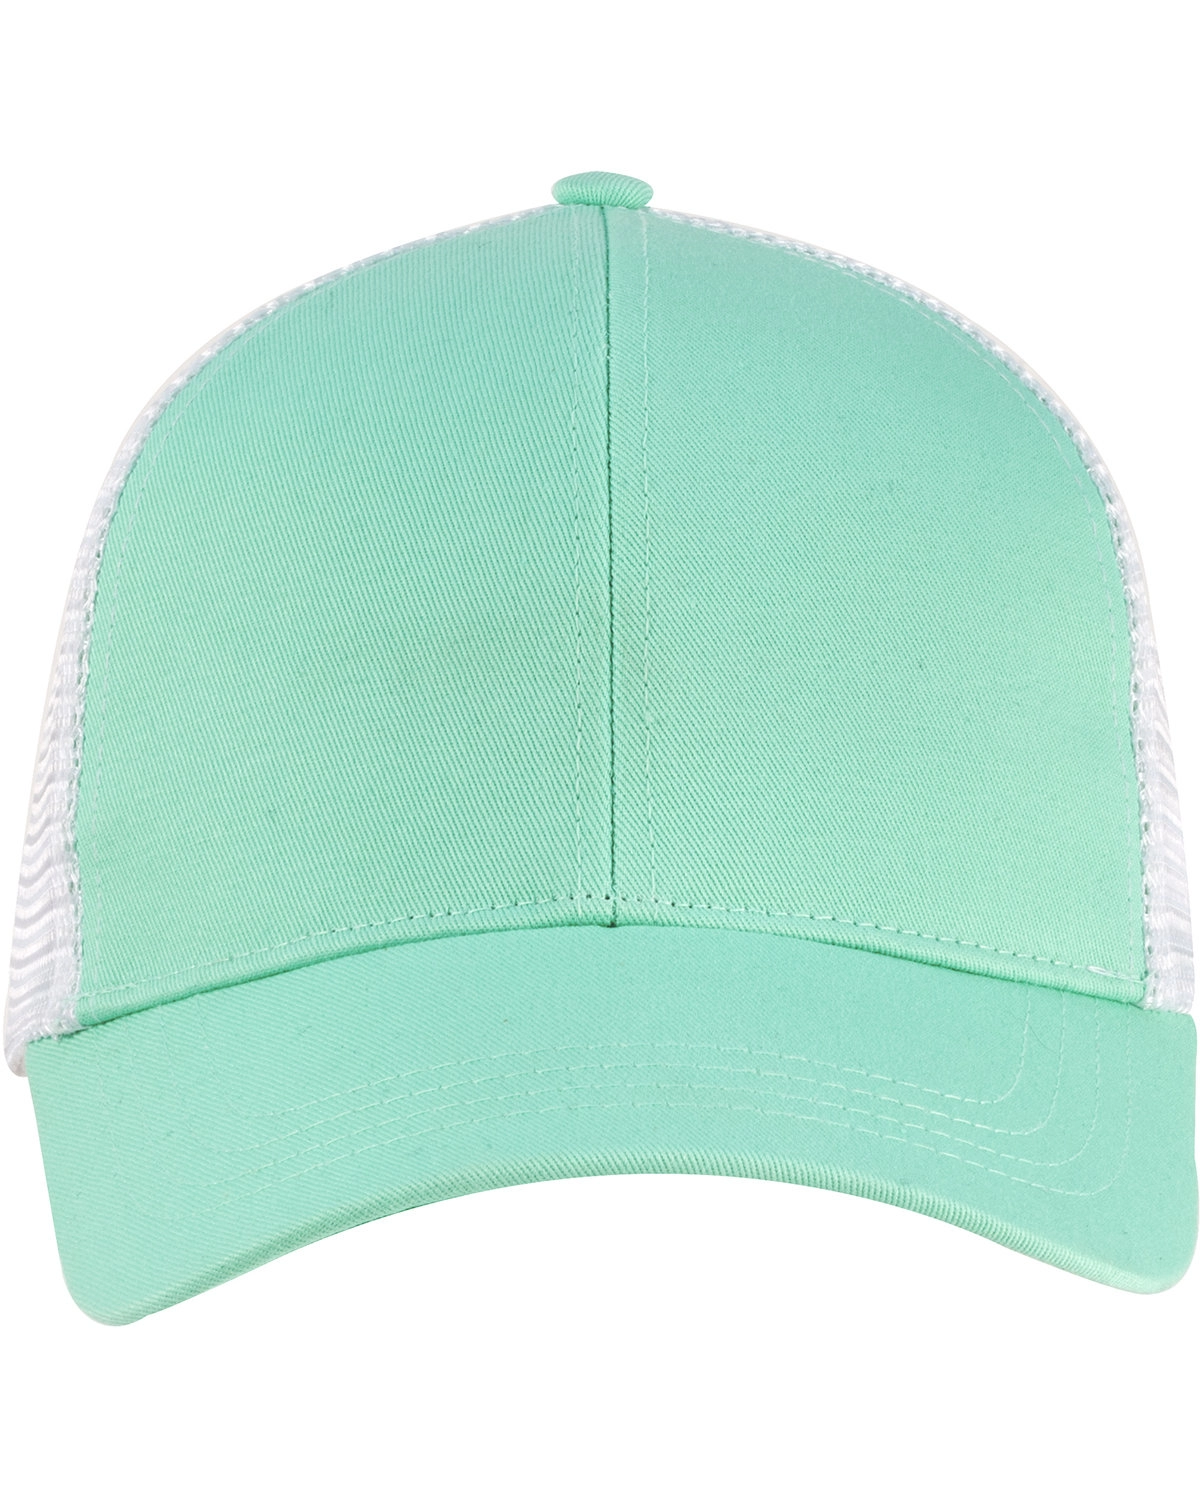 EC7070 econscious Eco Trucker From - Organic/Recycled